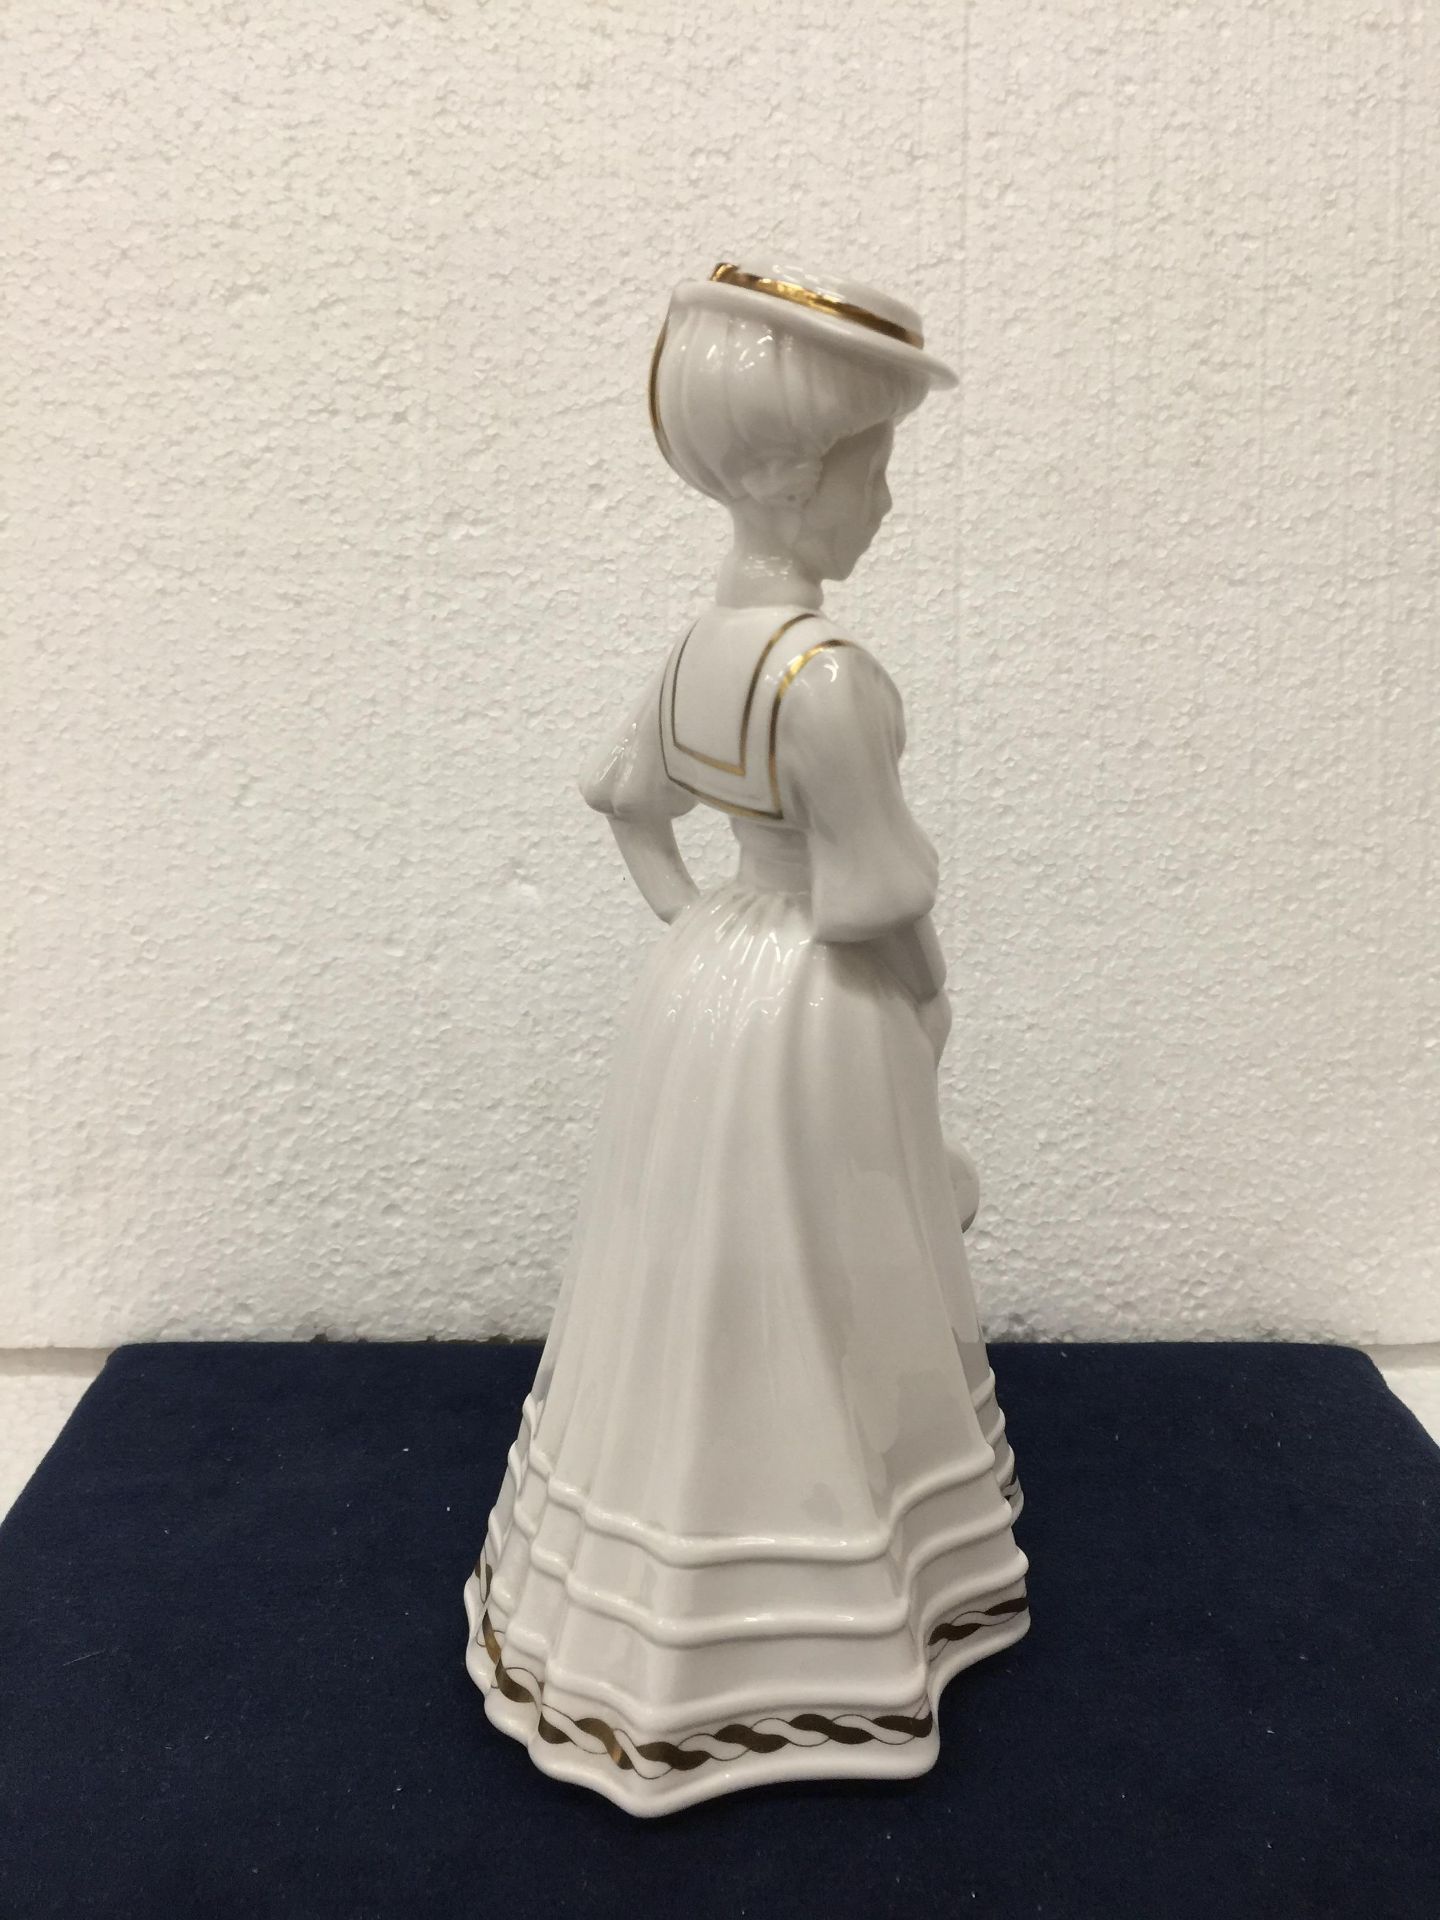 A SPODE FIGURINE "LILY" BY PAULINE SHONE IN GLOSS - 24CM (H) - Image 4 of 7